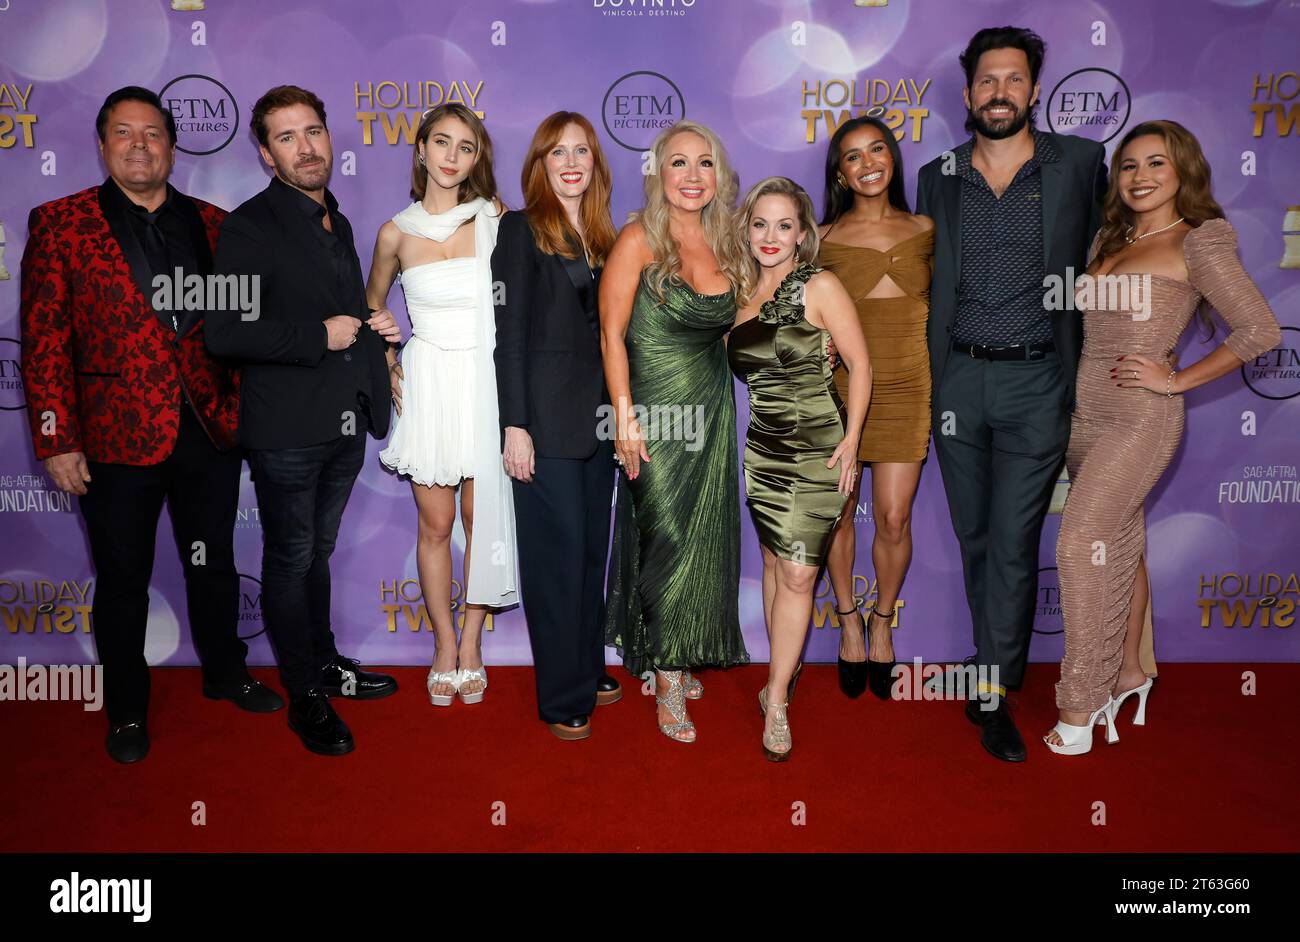 Hollywood, Ca. 7th Nov, 2023. Jeff Rector, Caylee Cowan, Sadie Stratton, Stephanie Garvin, Kelly Stables, Melody Thorton, Brian Thomas Smith, Haley Reinhard at the world premiere of Holiday Twist at the TCL Chinese Theater in Hollywood, California on November 7, 2023. Credit: Faye Sadou/Media Punch/Alamy Live News Stock Photo